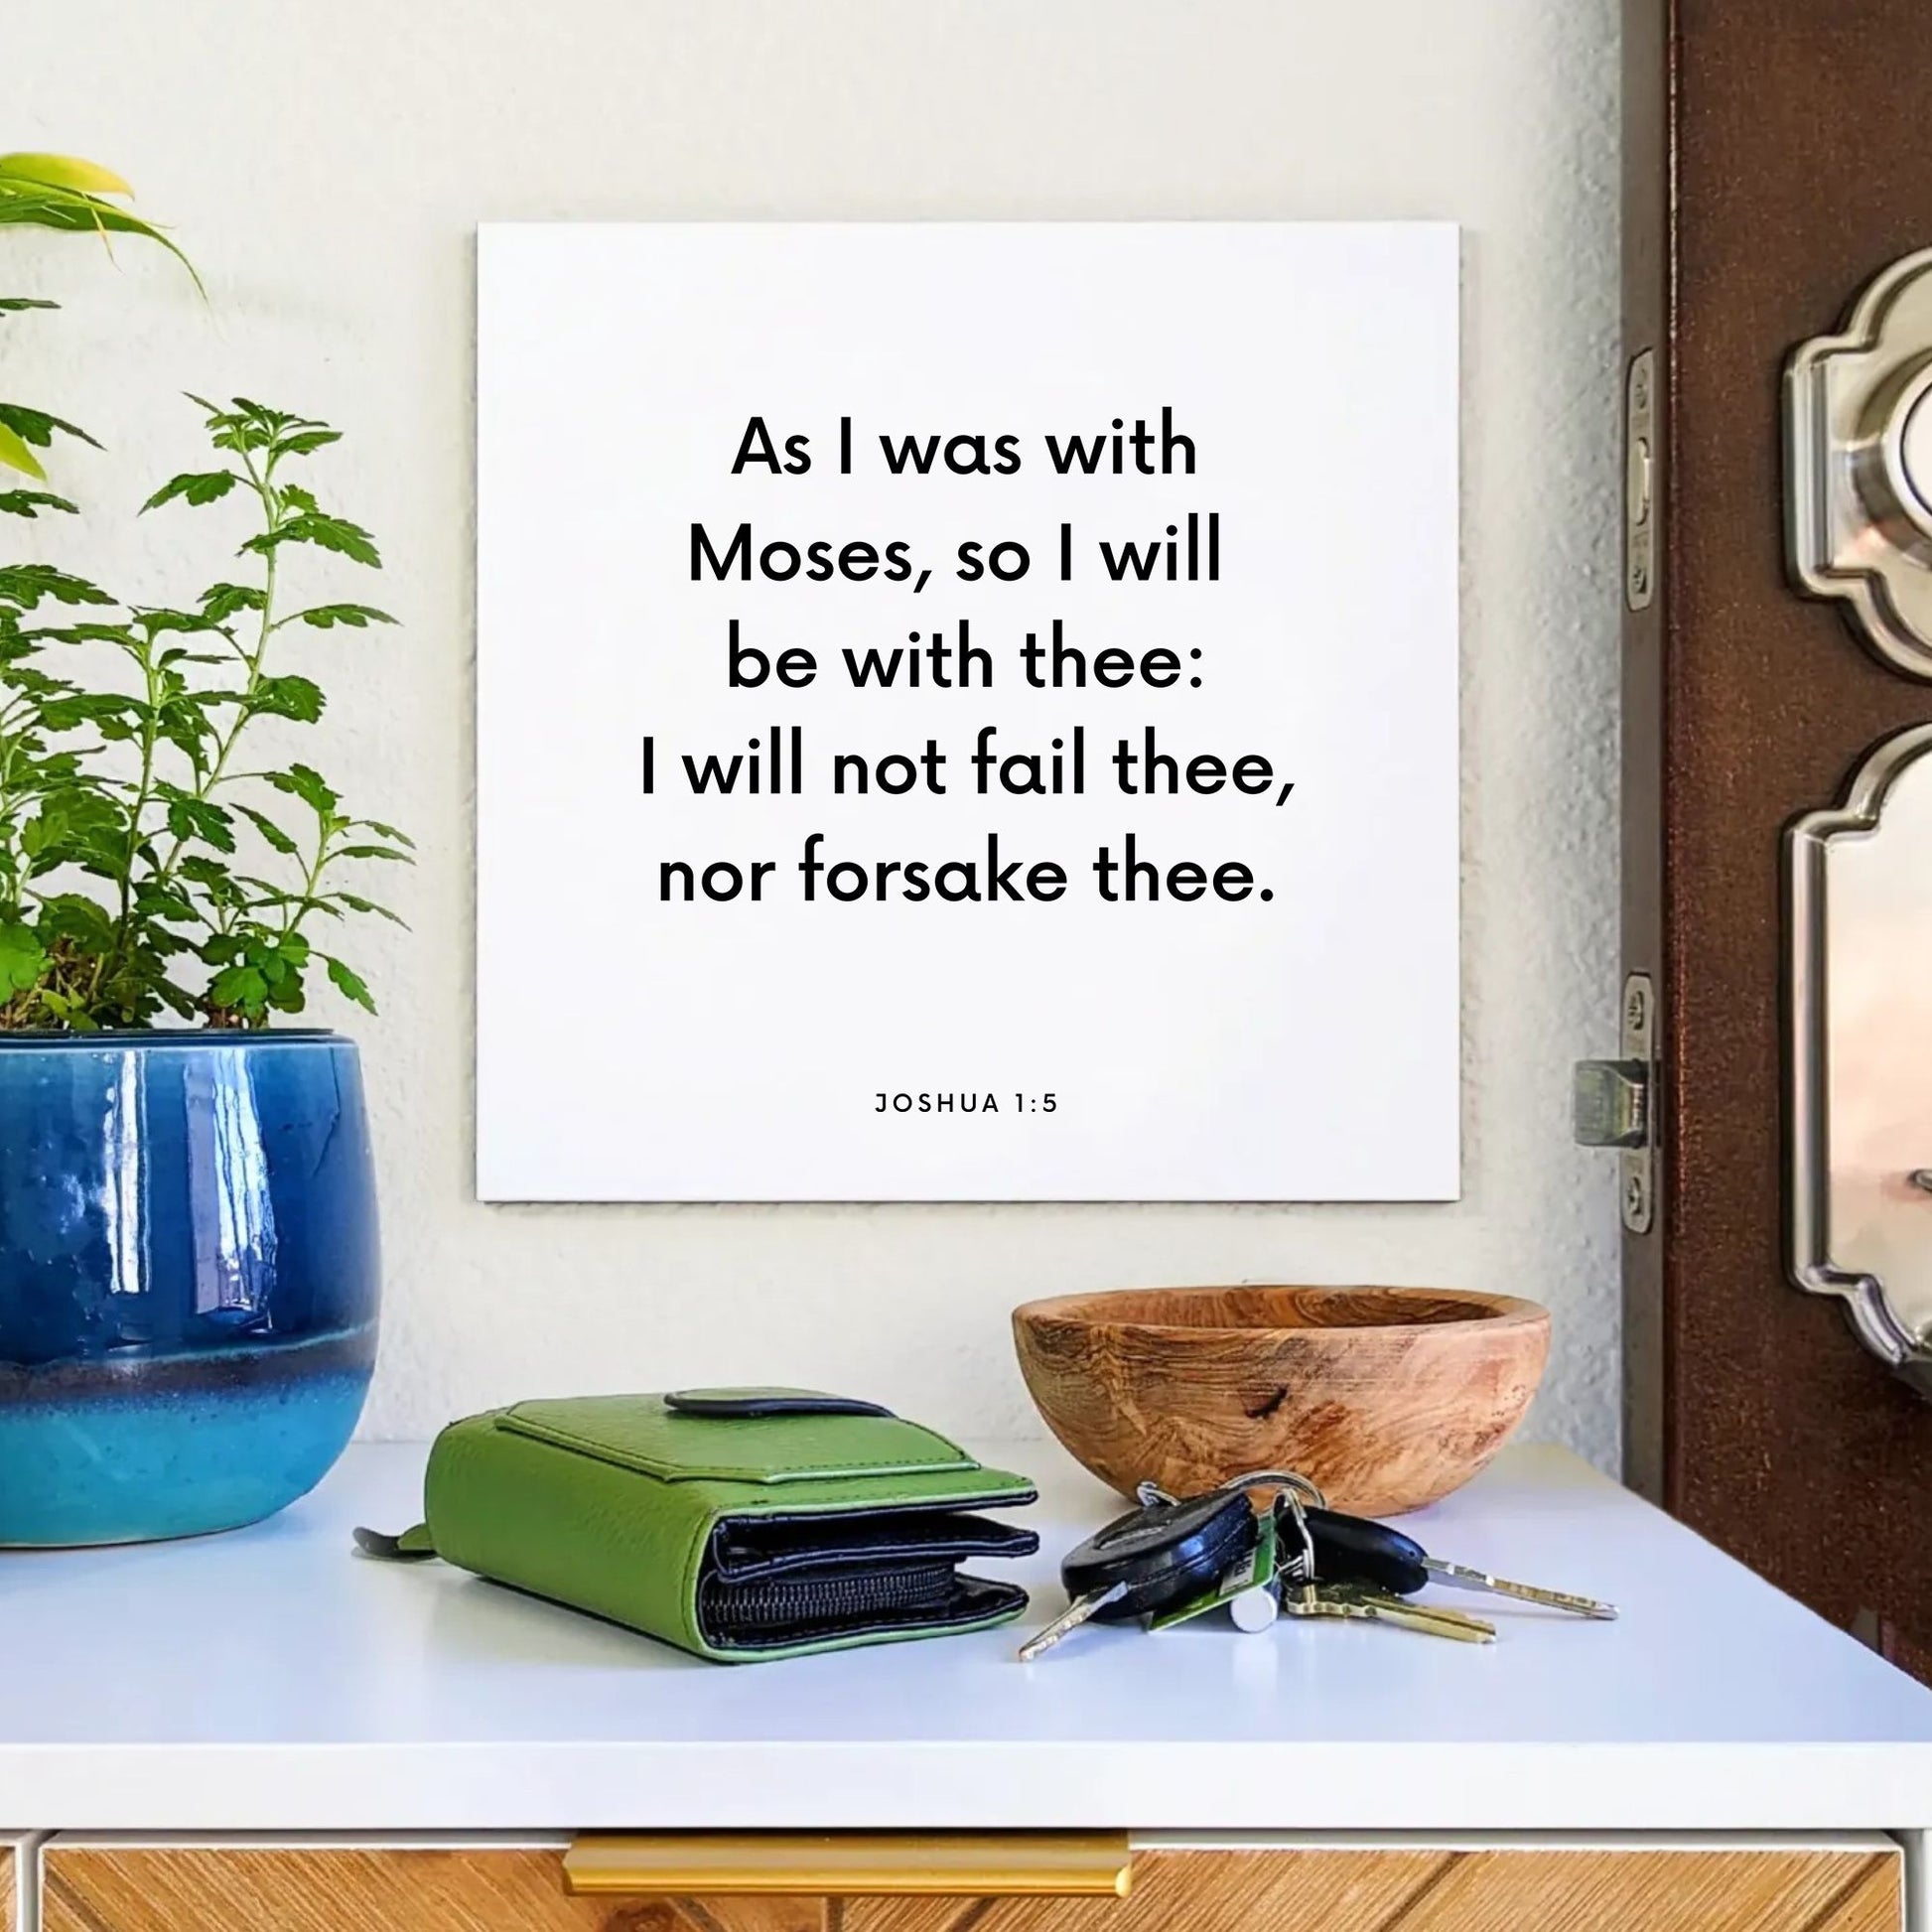 Entryway mouting of the scripture tile for Joshua 1:5 - "I will not fail thee, nor forsake thee"